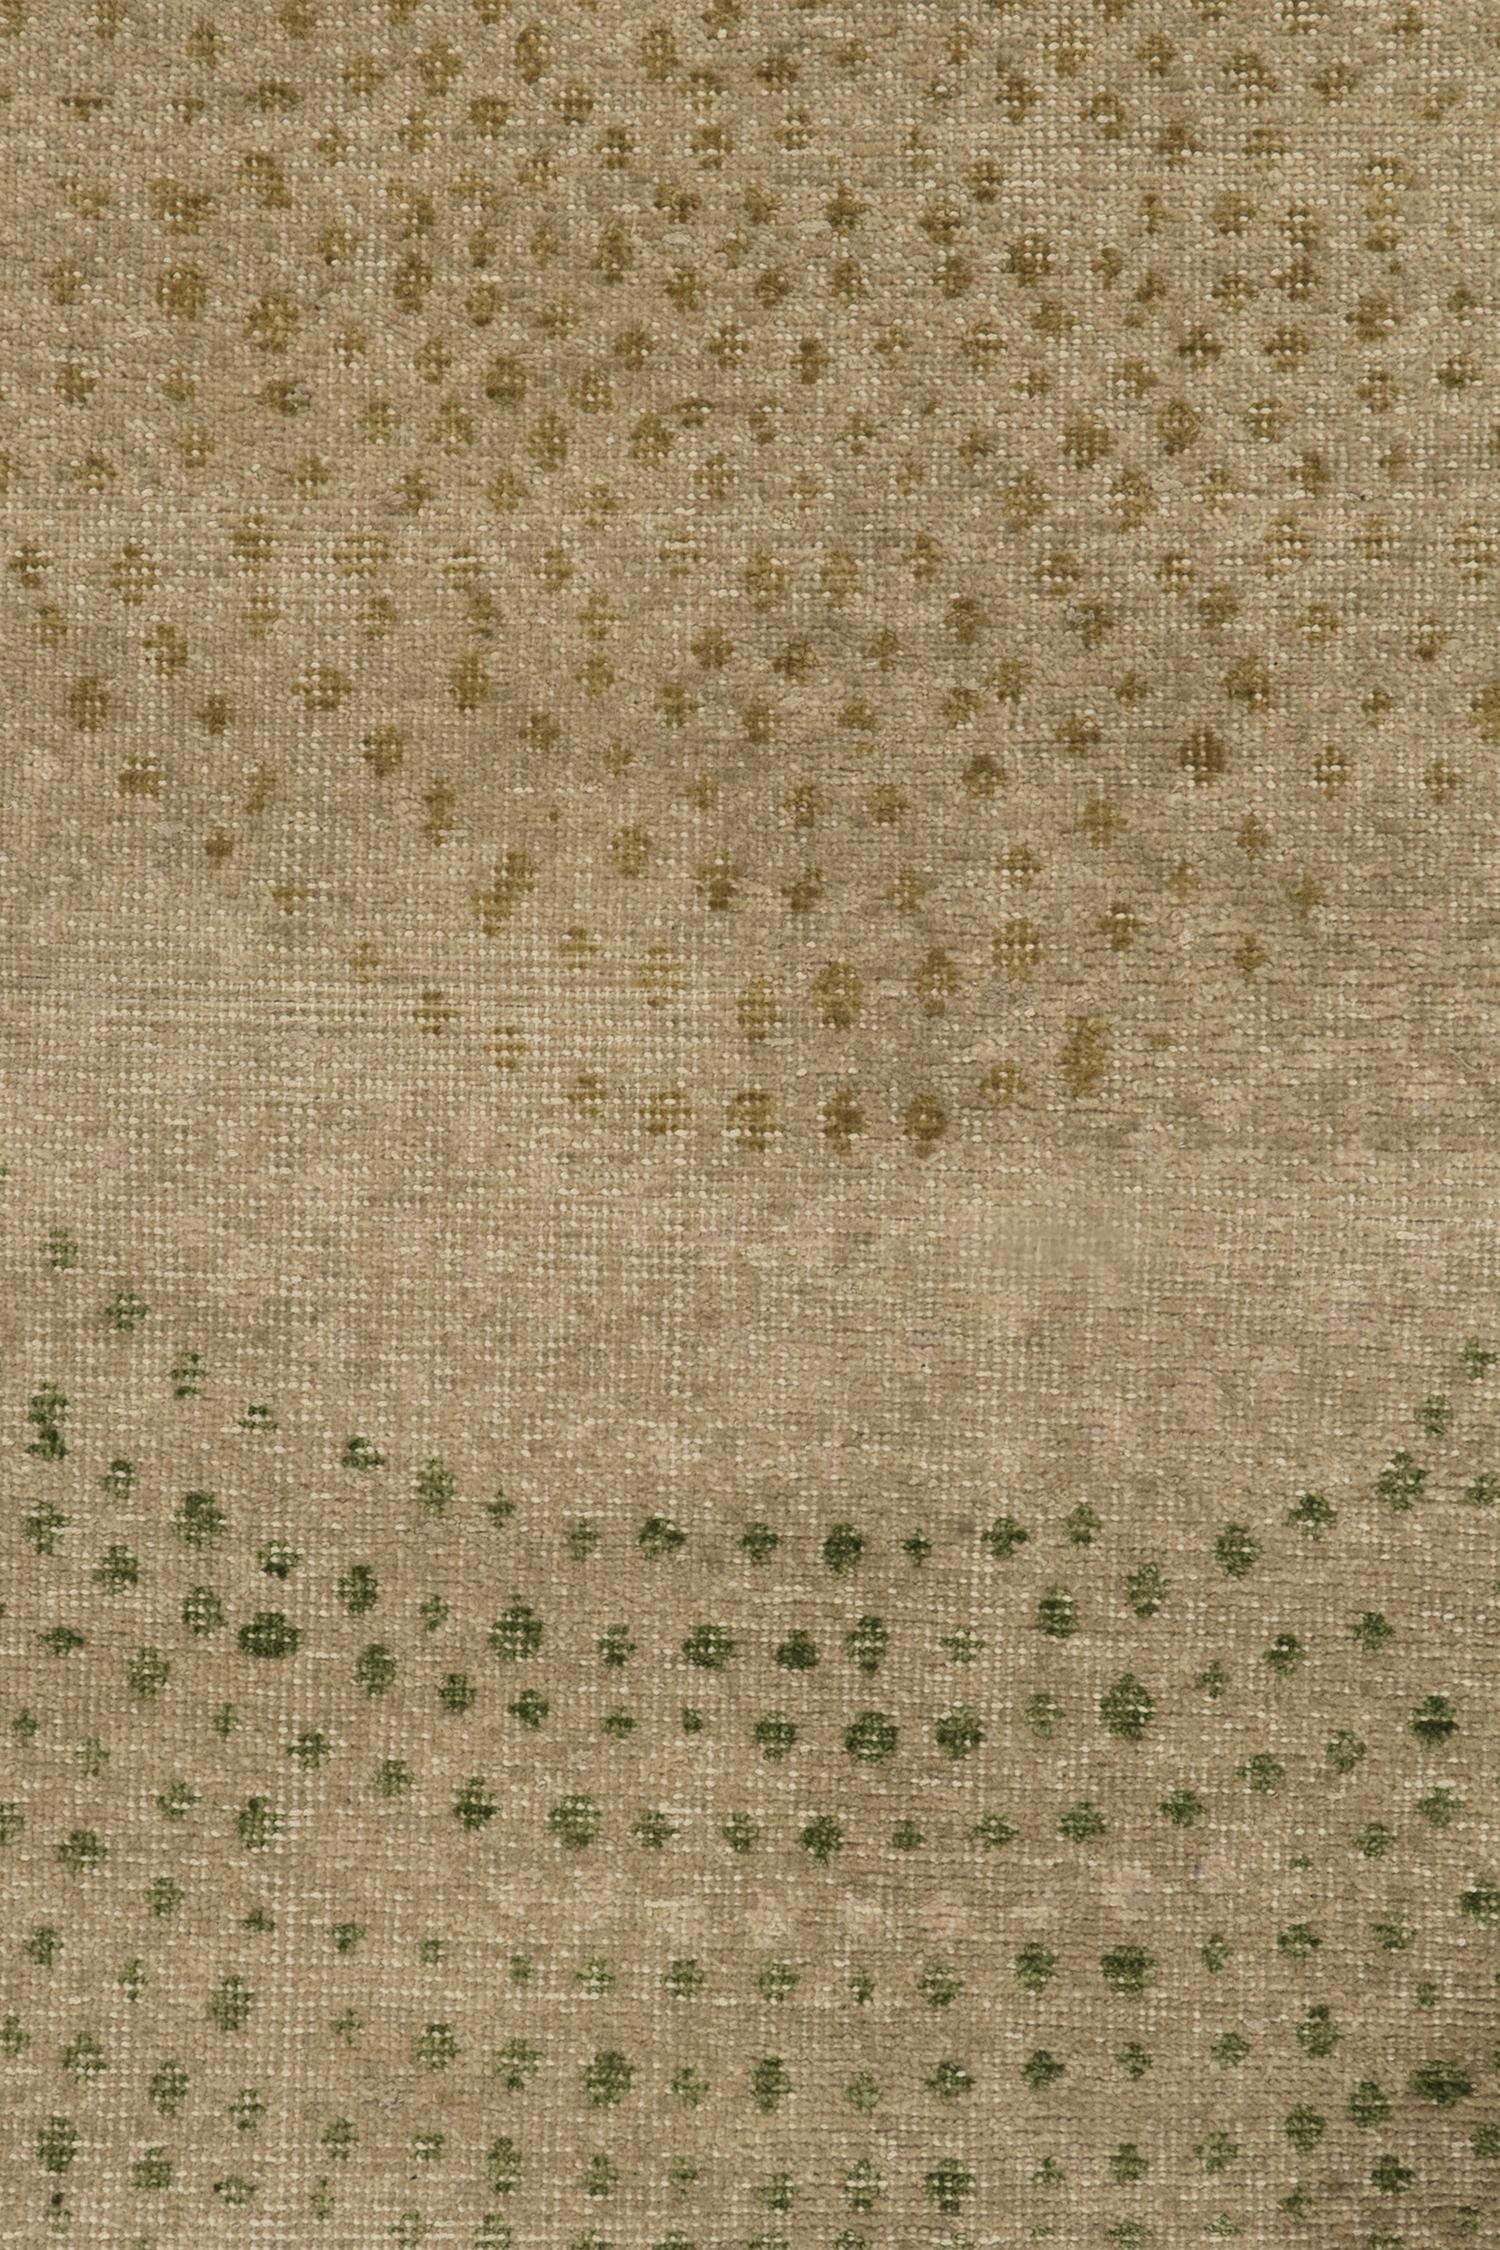 Contemporary Rug & Kilim’s Distressed Style Runner in Beige & Green Abstract Dots Pattern For Sale